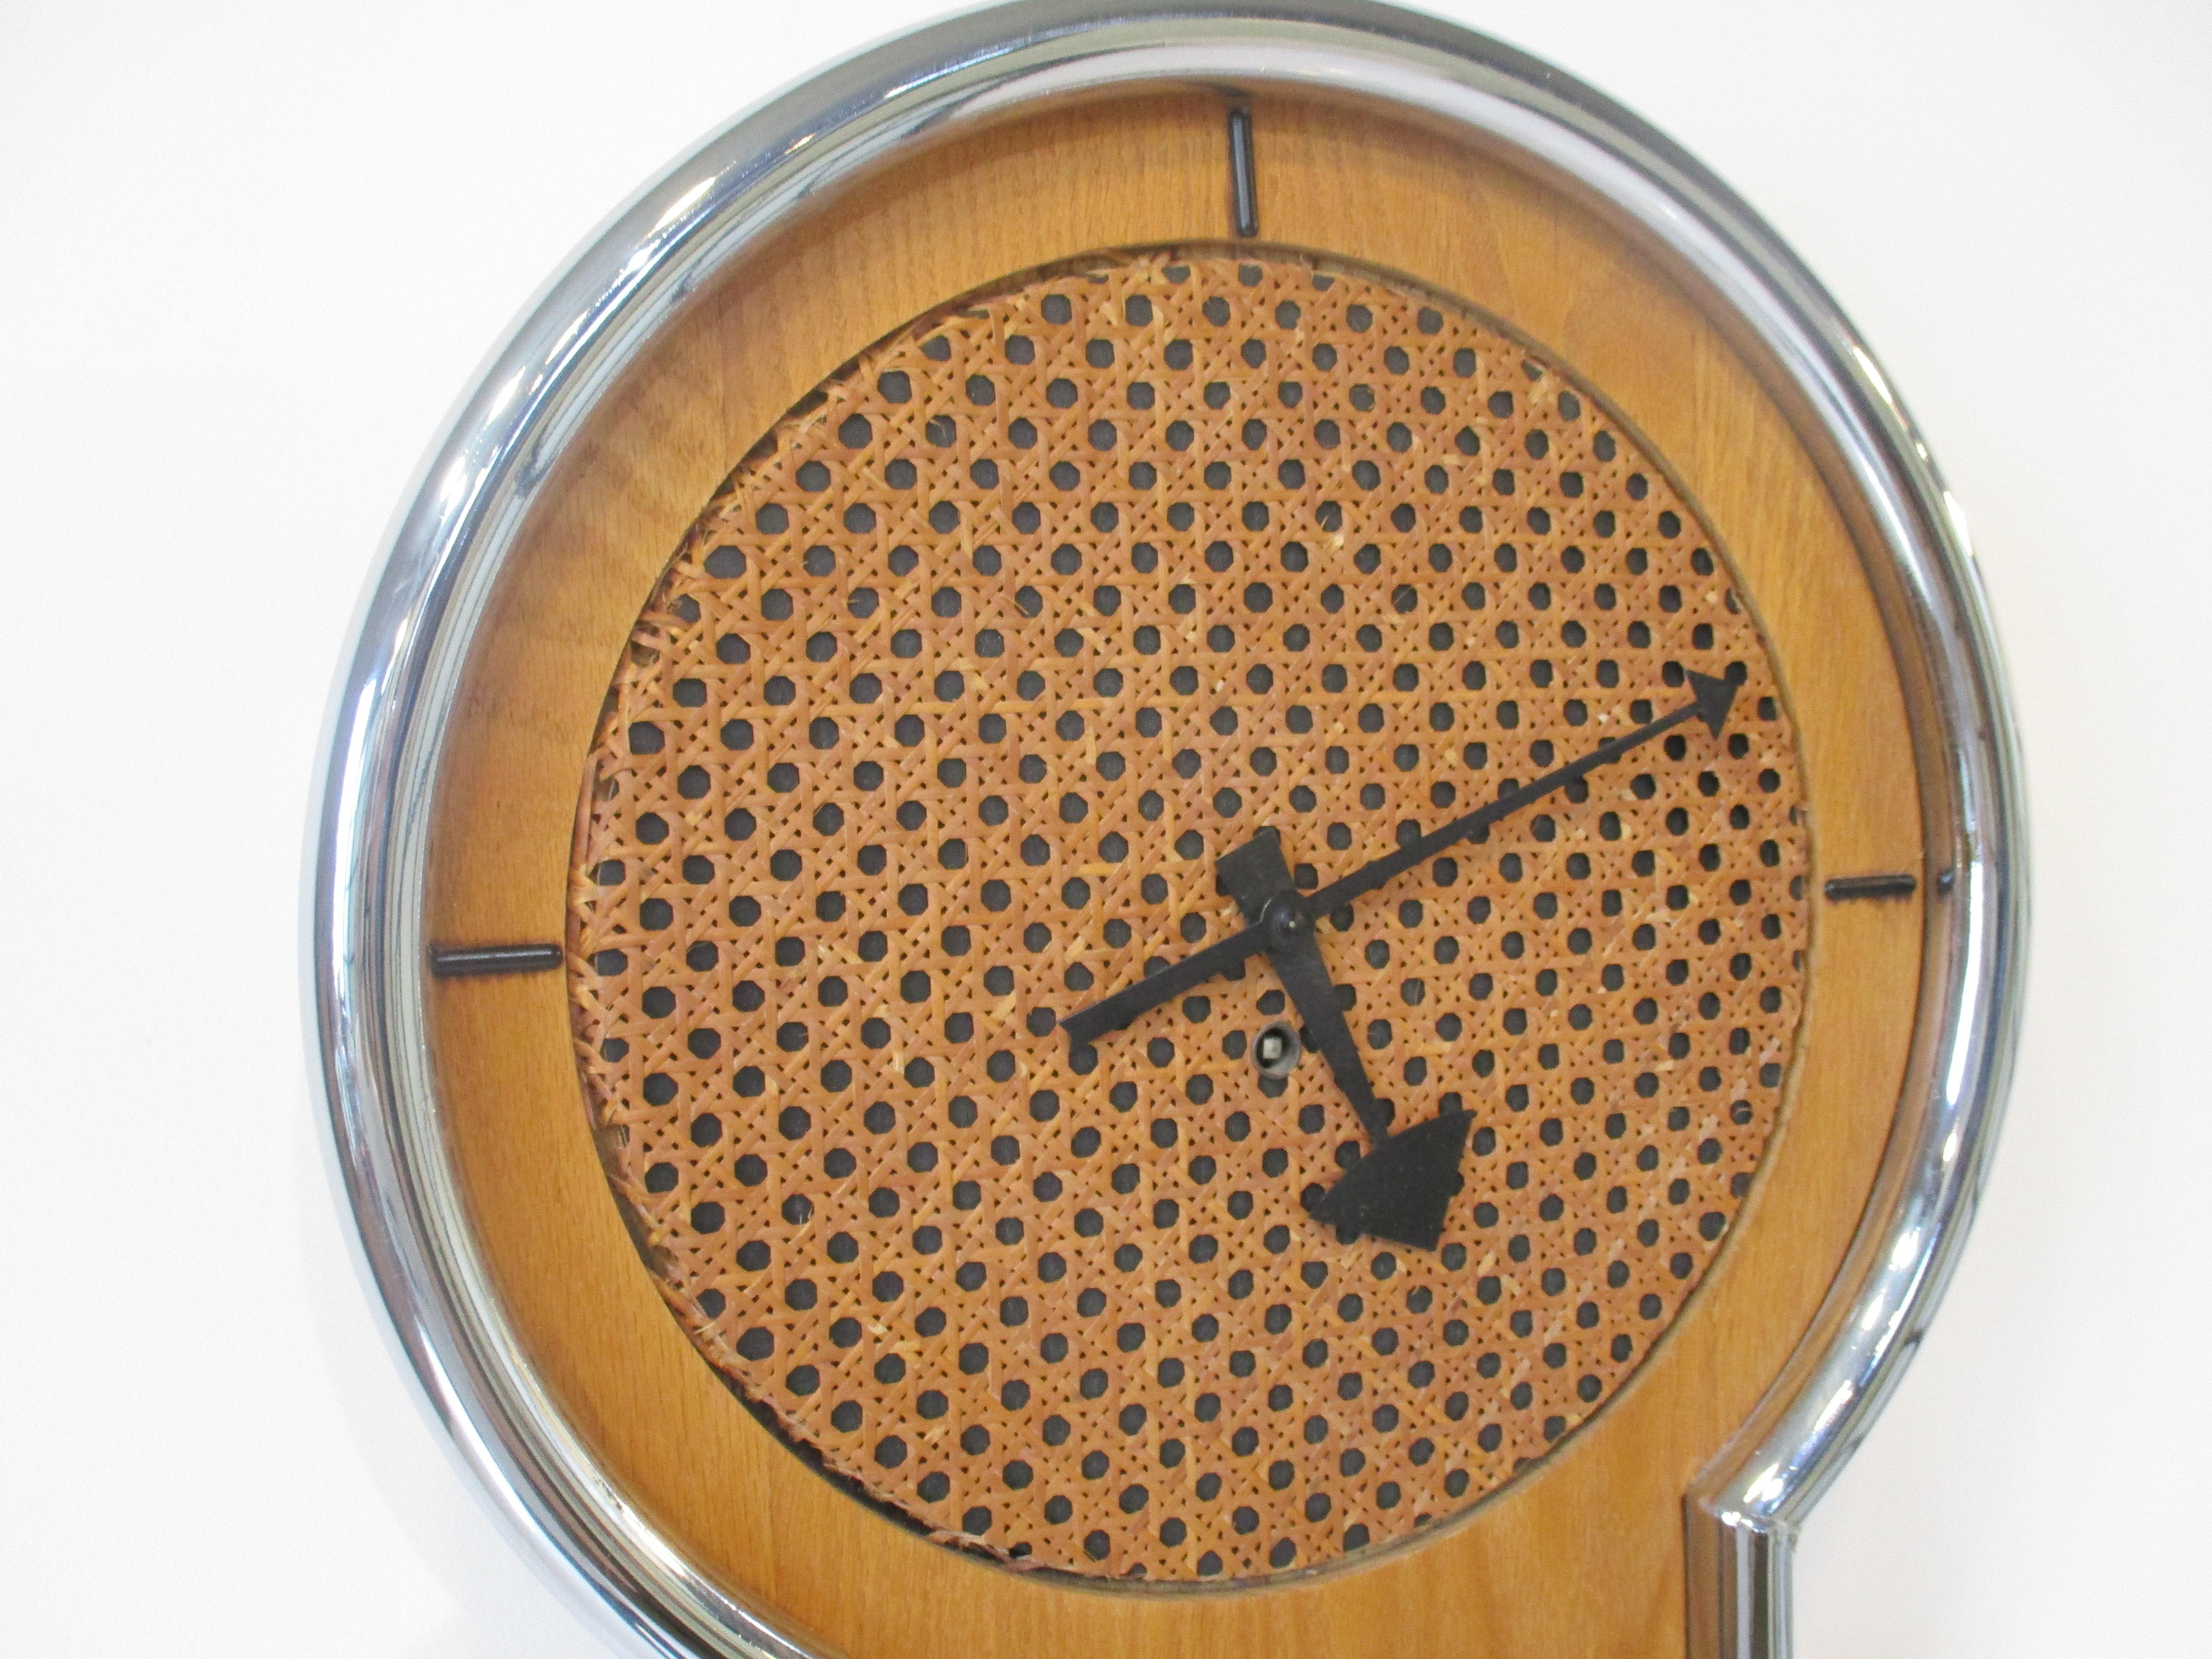 American Howard Miller Wall Clock # 614 George Nelson Styled